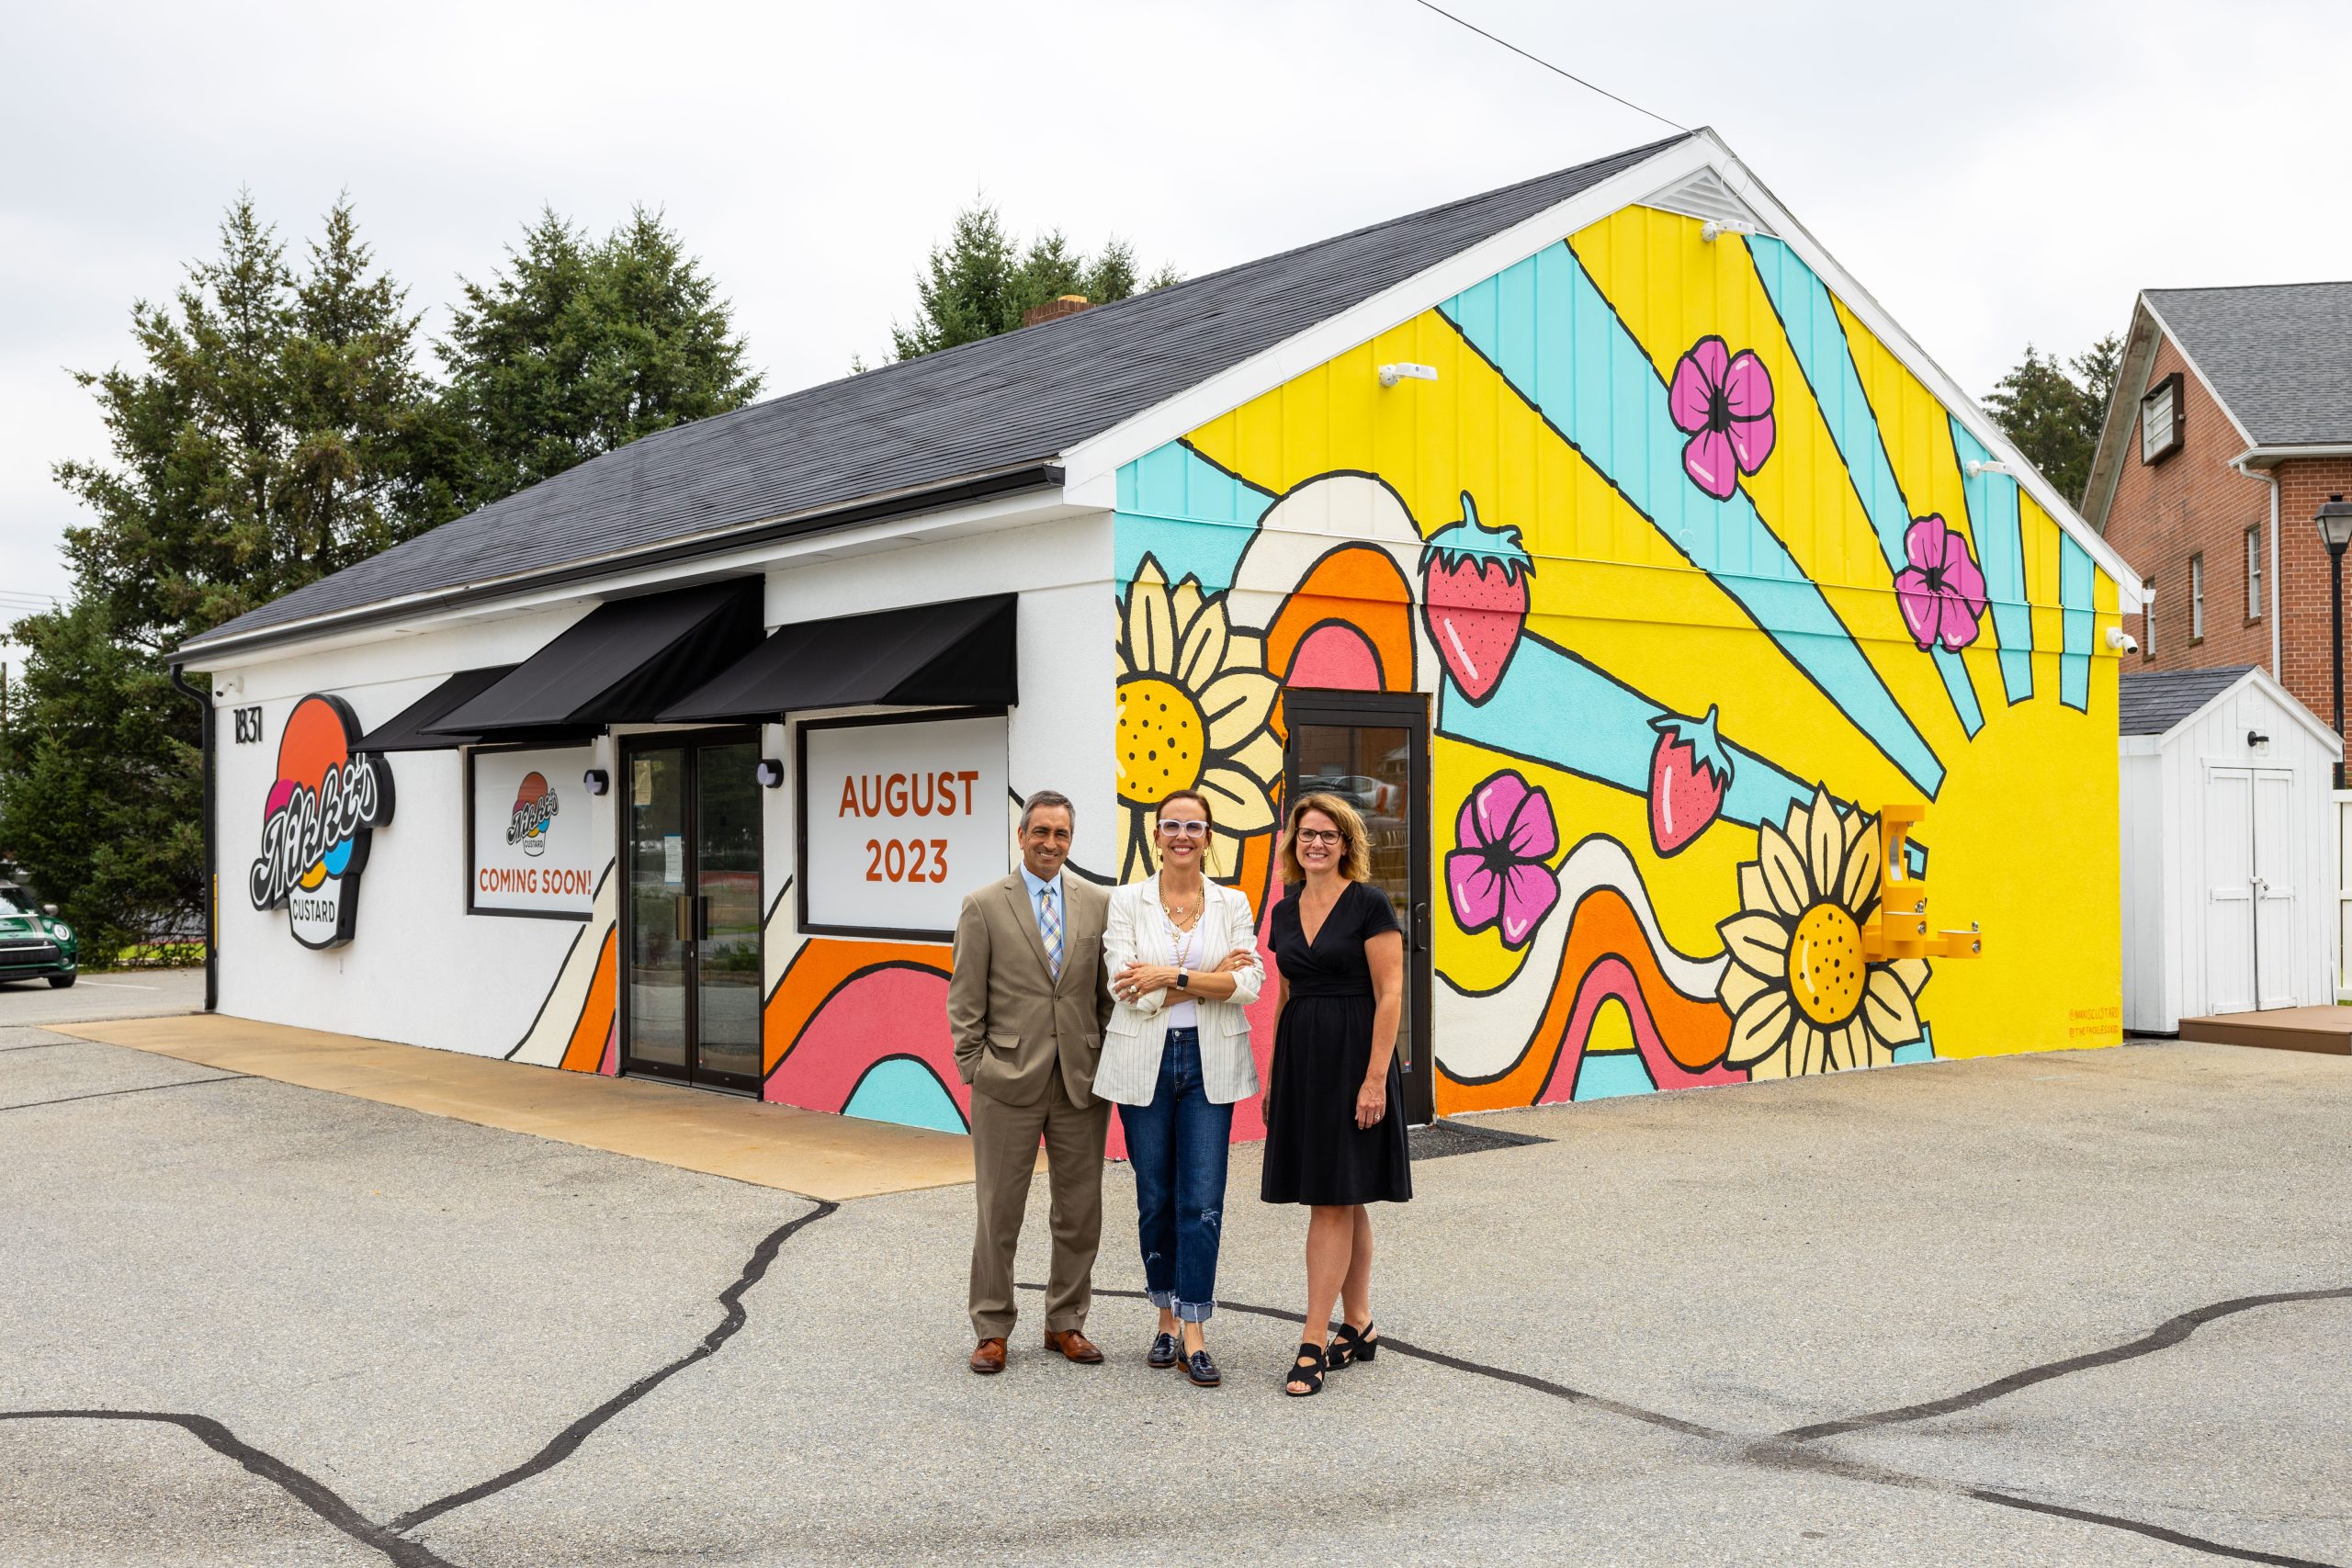 A man and two women smiling in front of a colorful custard shop